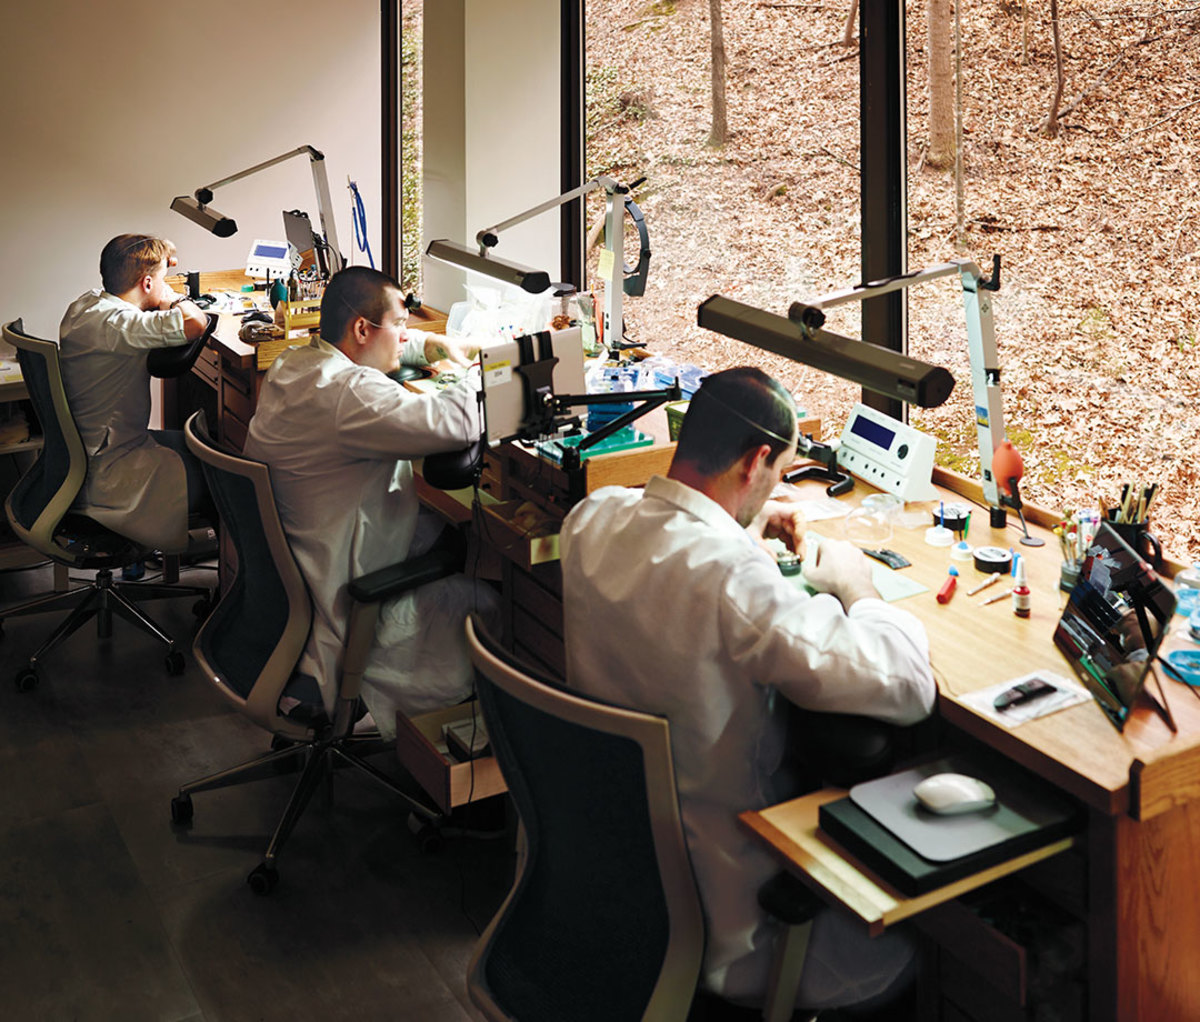 technicians and watchmakers in the company's workshop